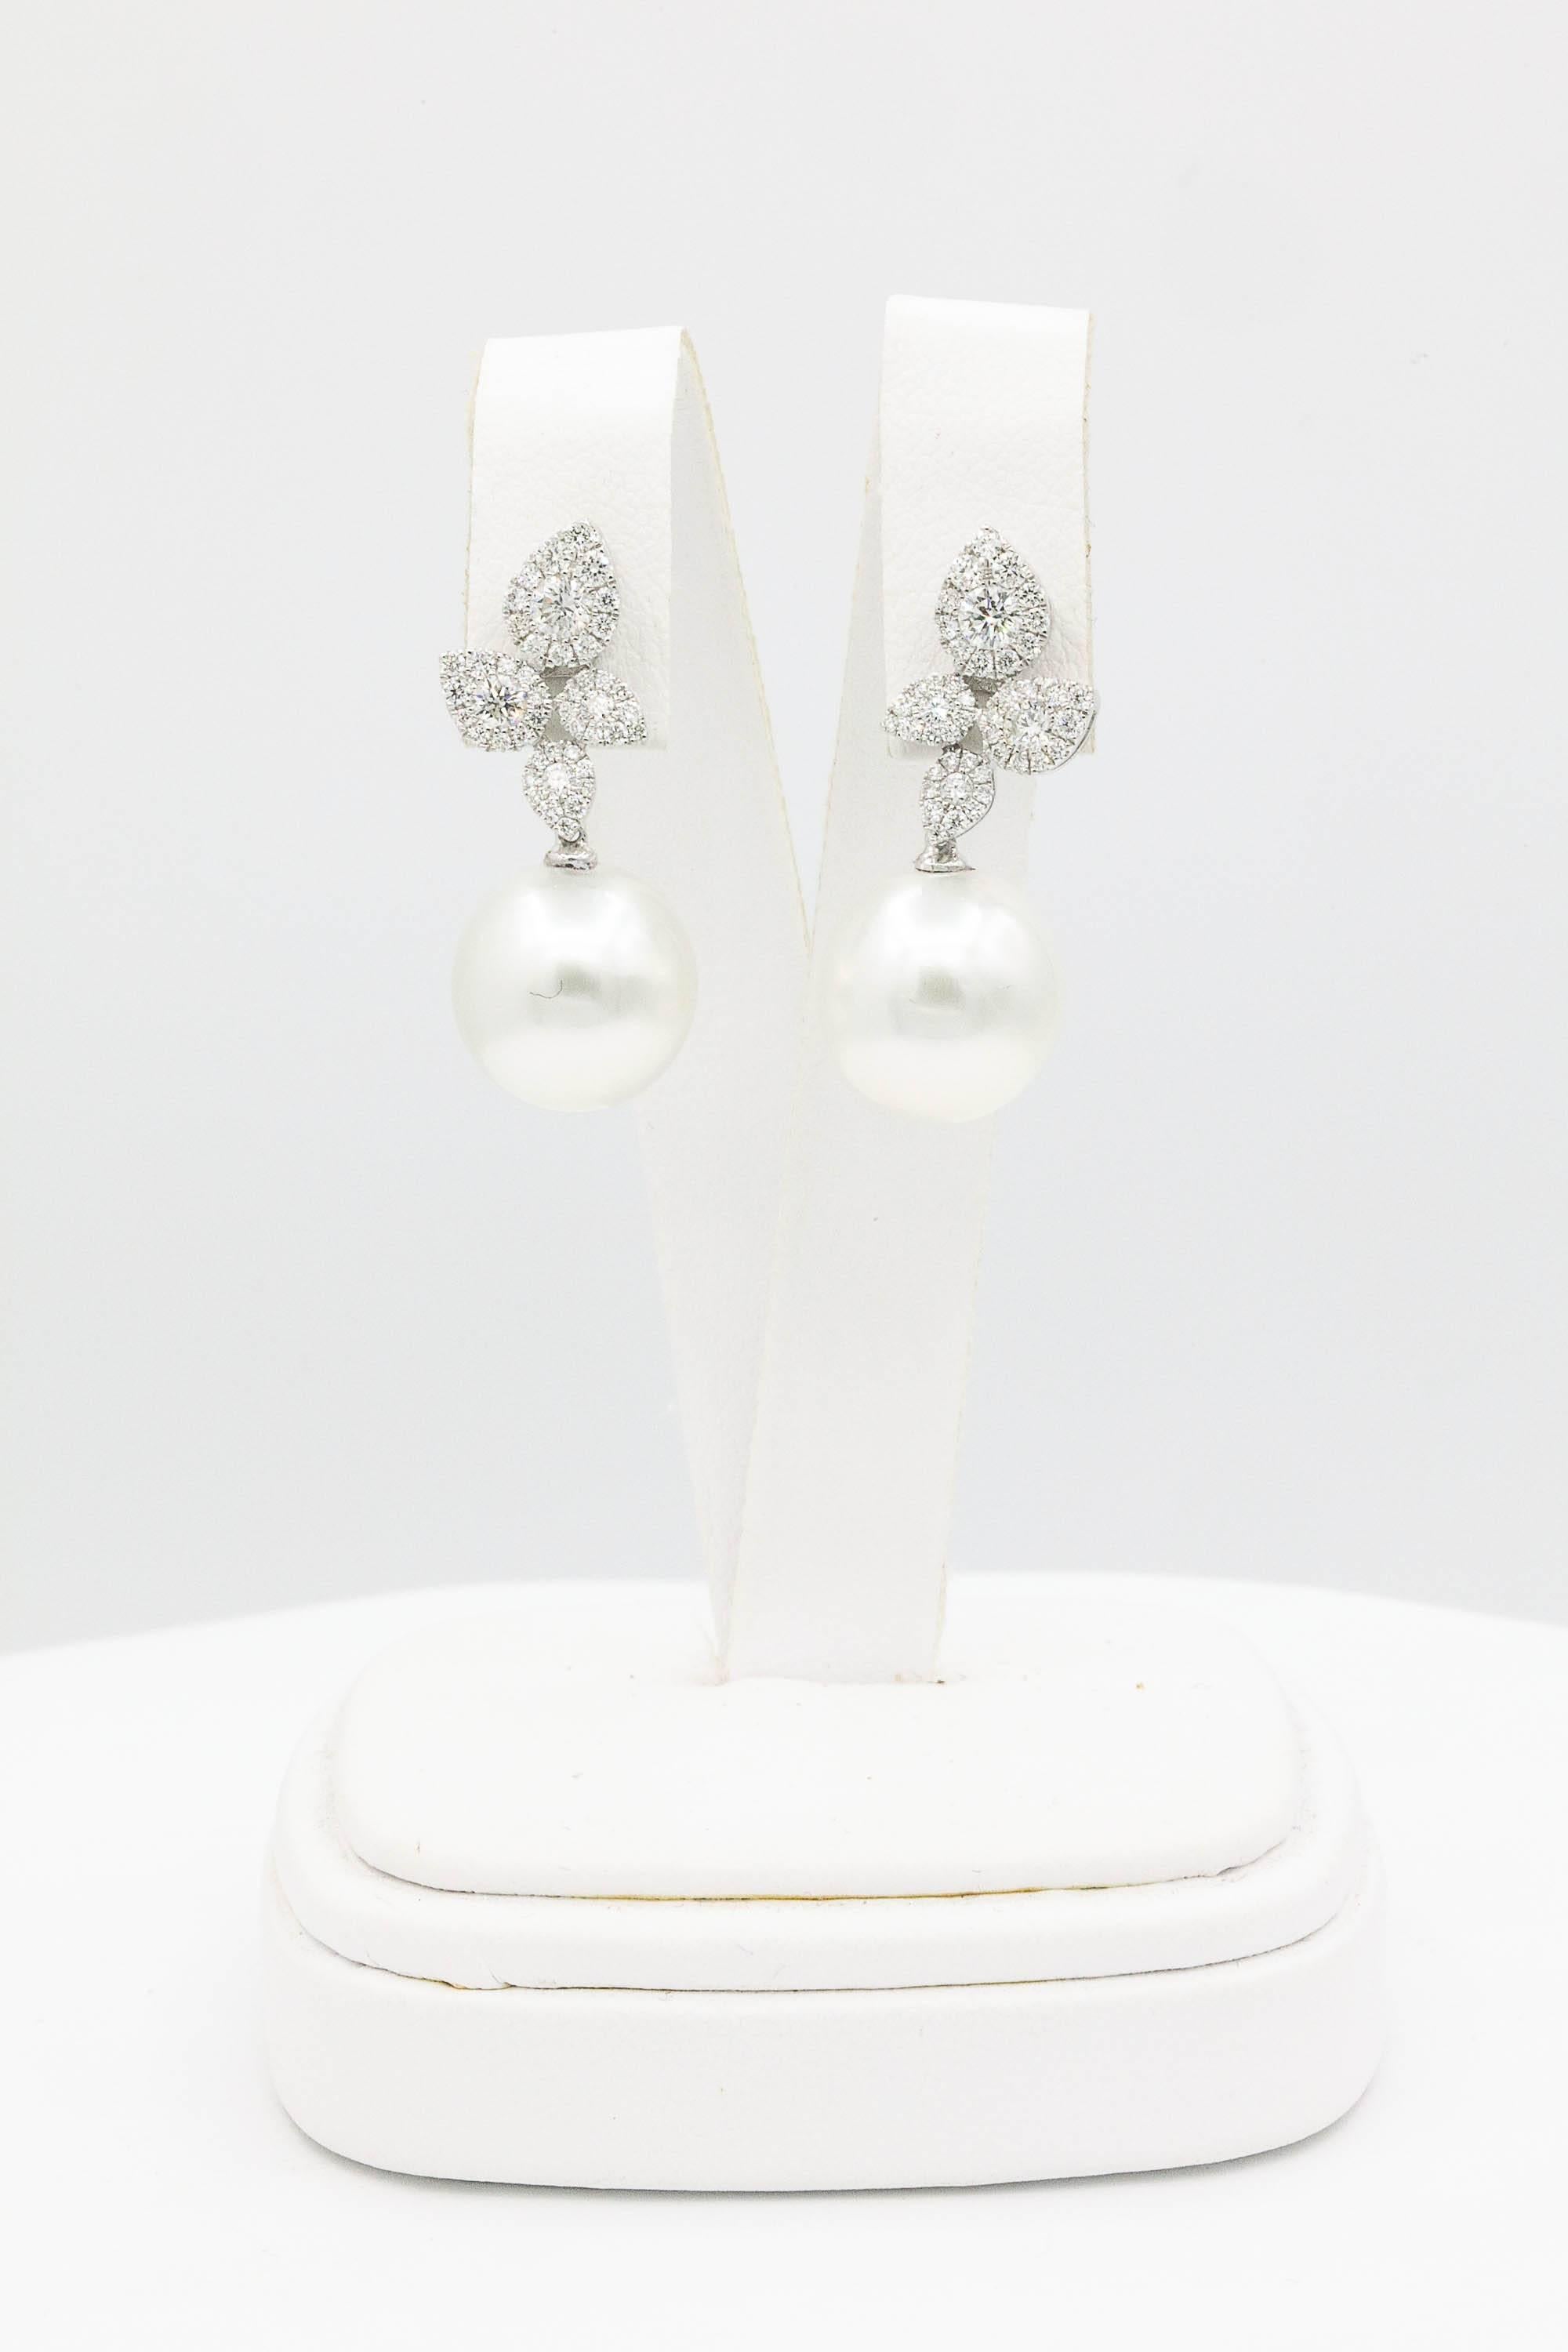 Contemporary South Sea Pearl Diamond Cluster Leaf Earrings 1.05 CTS 18K